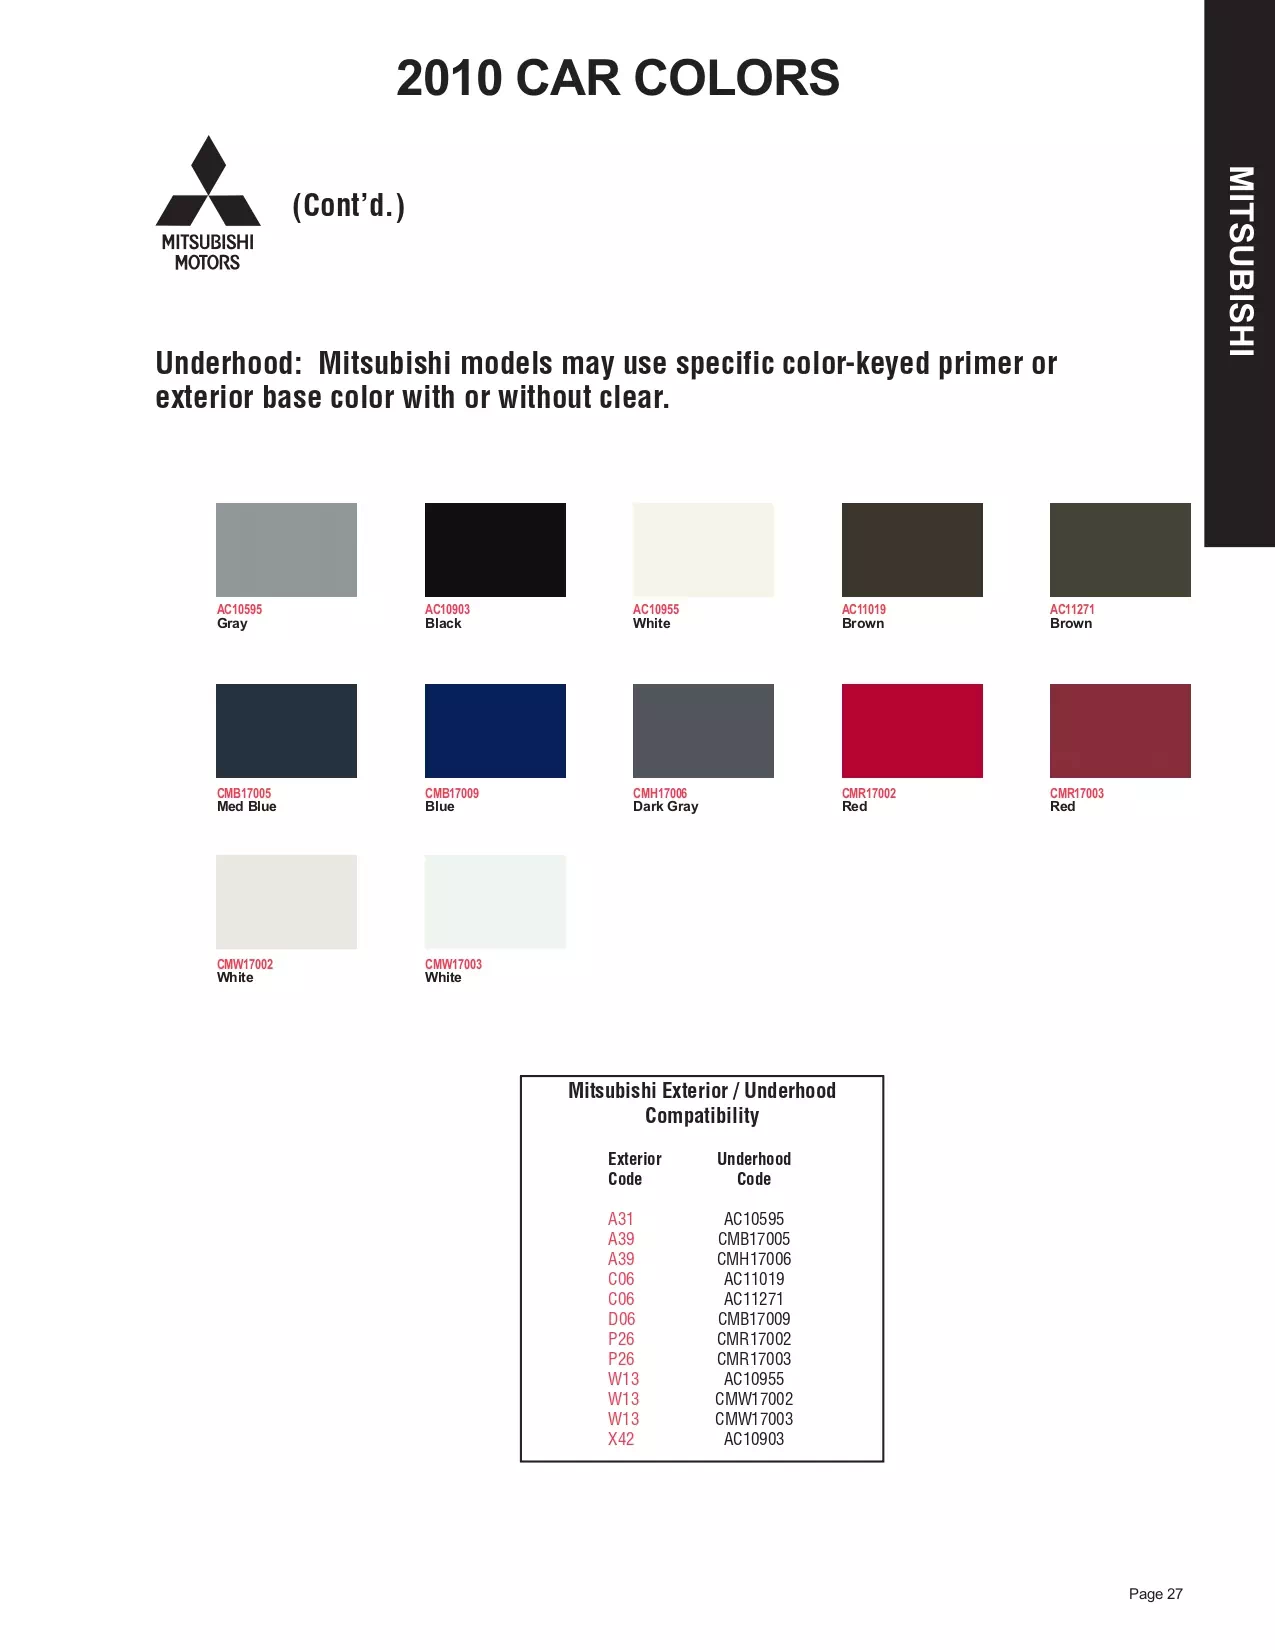 a color chart showing 2010 Mitsubishi exterior paint codes, and their color names.